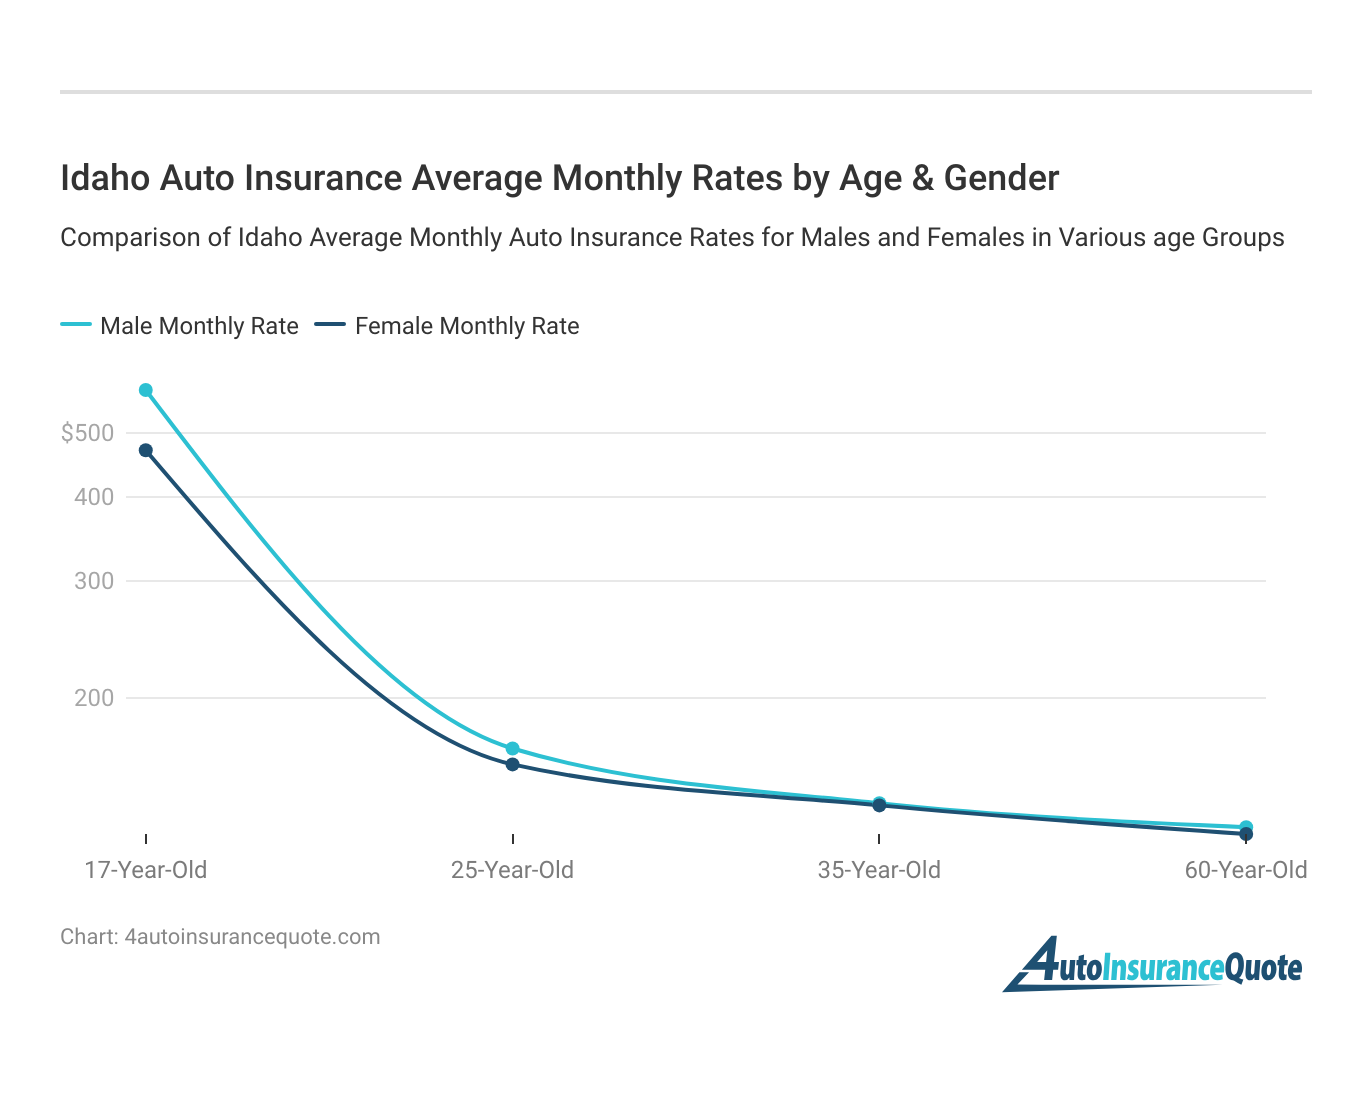 <h3>Idaho Auto Insurance Average Monthly Rates by Age & Gender</h3>